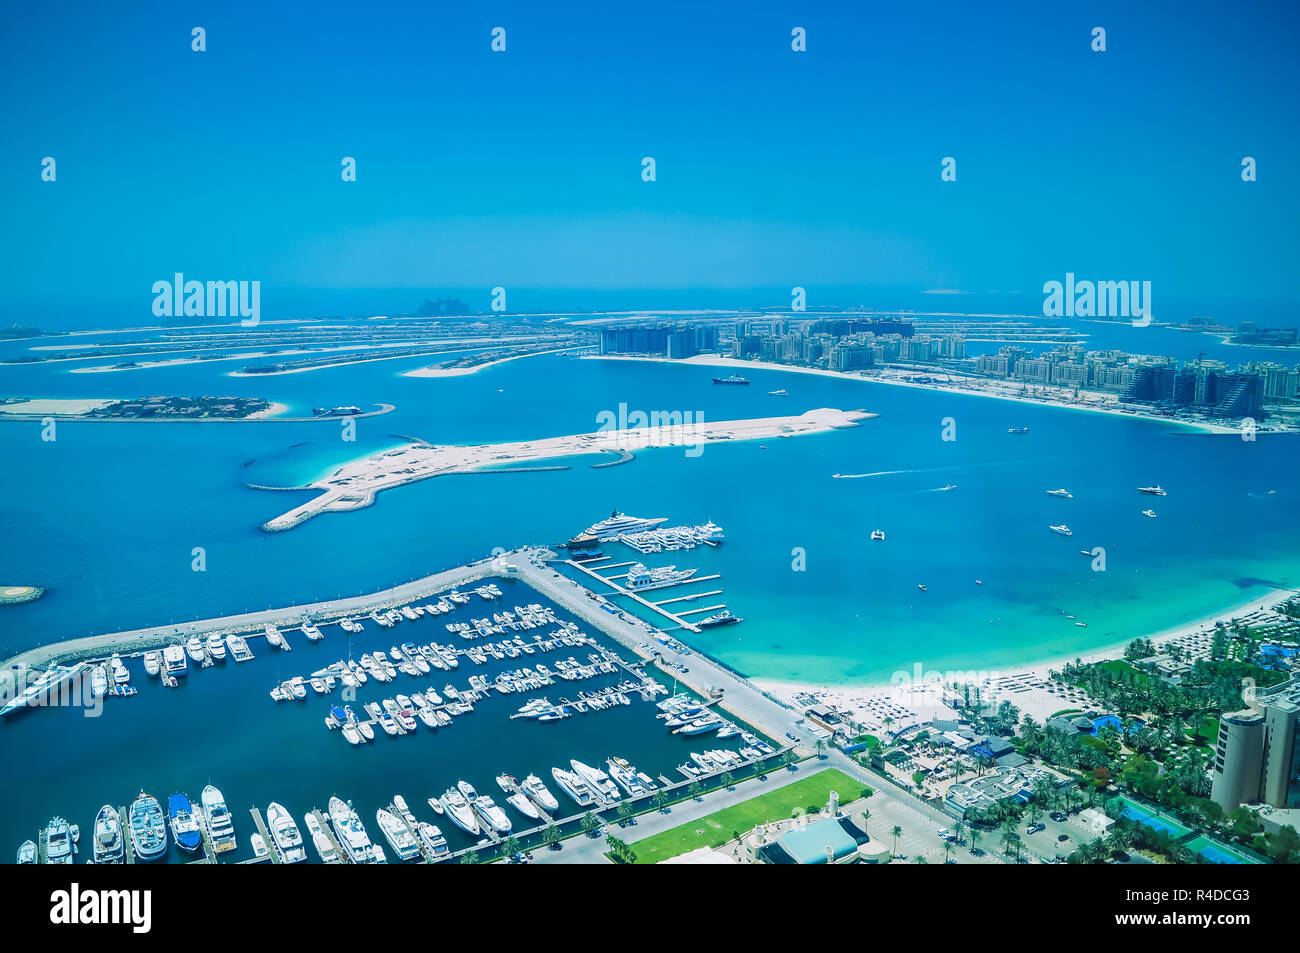 Aerial view of Palm Jumeirah Island with luxury yachts in the front. Development of Dubai. Stock Photo